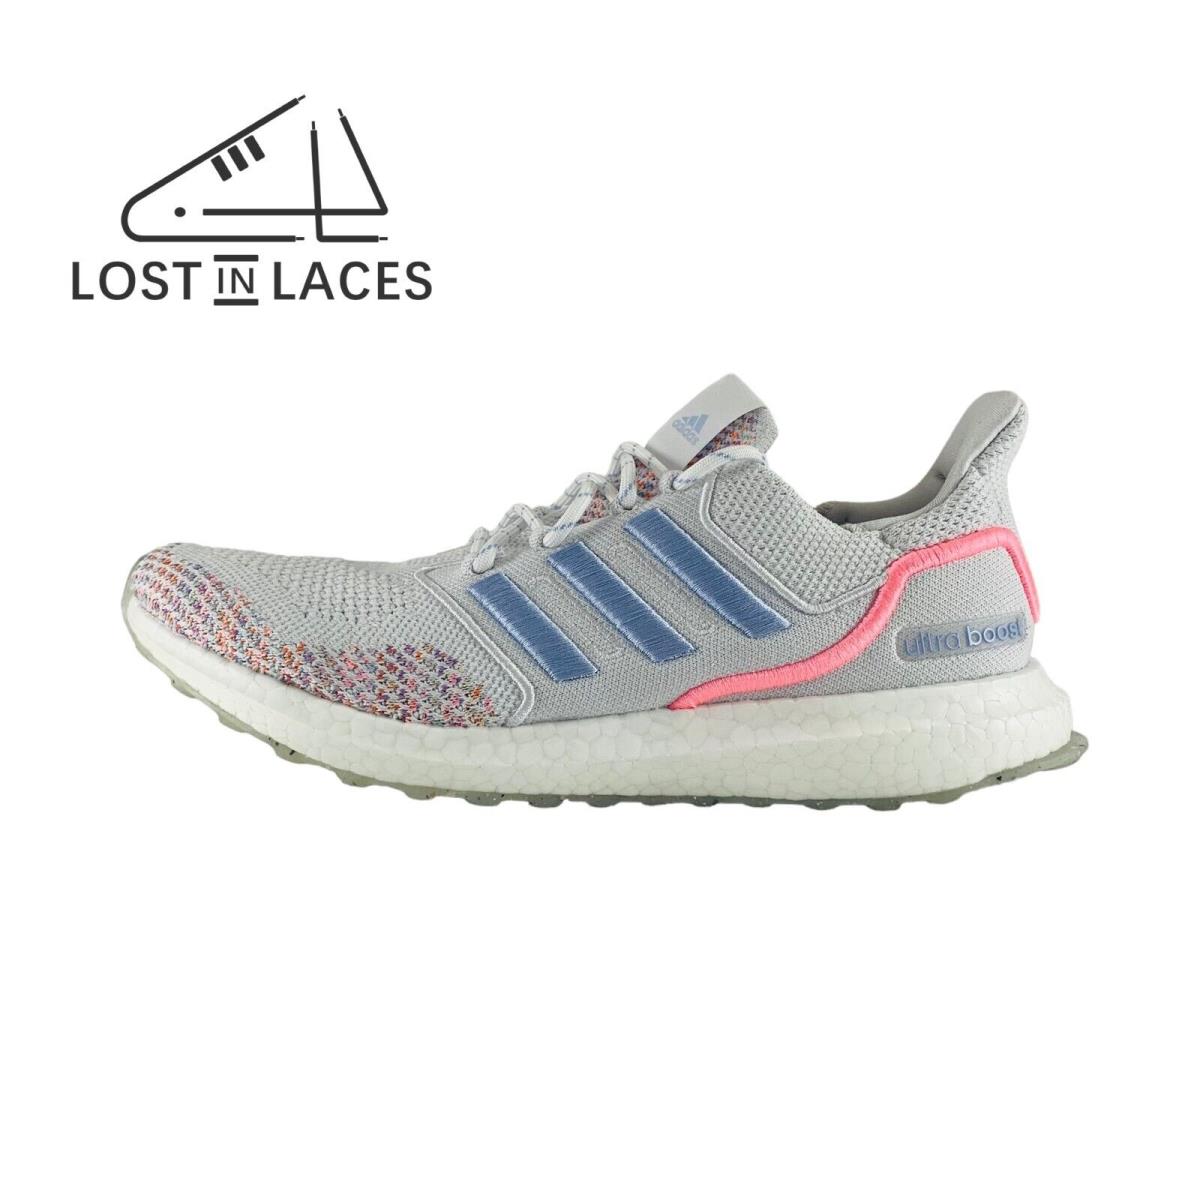 Adidas Ultraboost 1.0 White Blue Dawn Pink Running Shoes Women`s Sizes